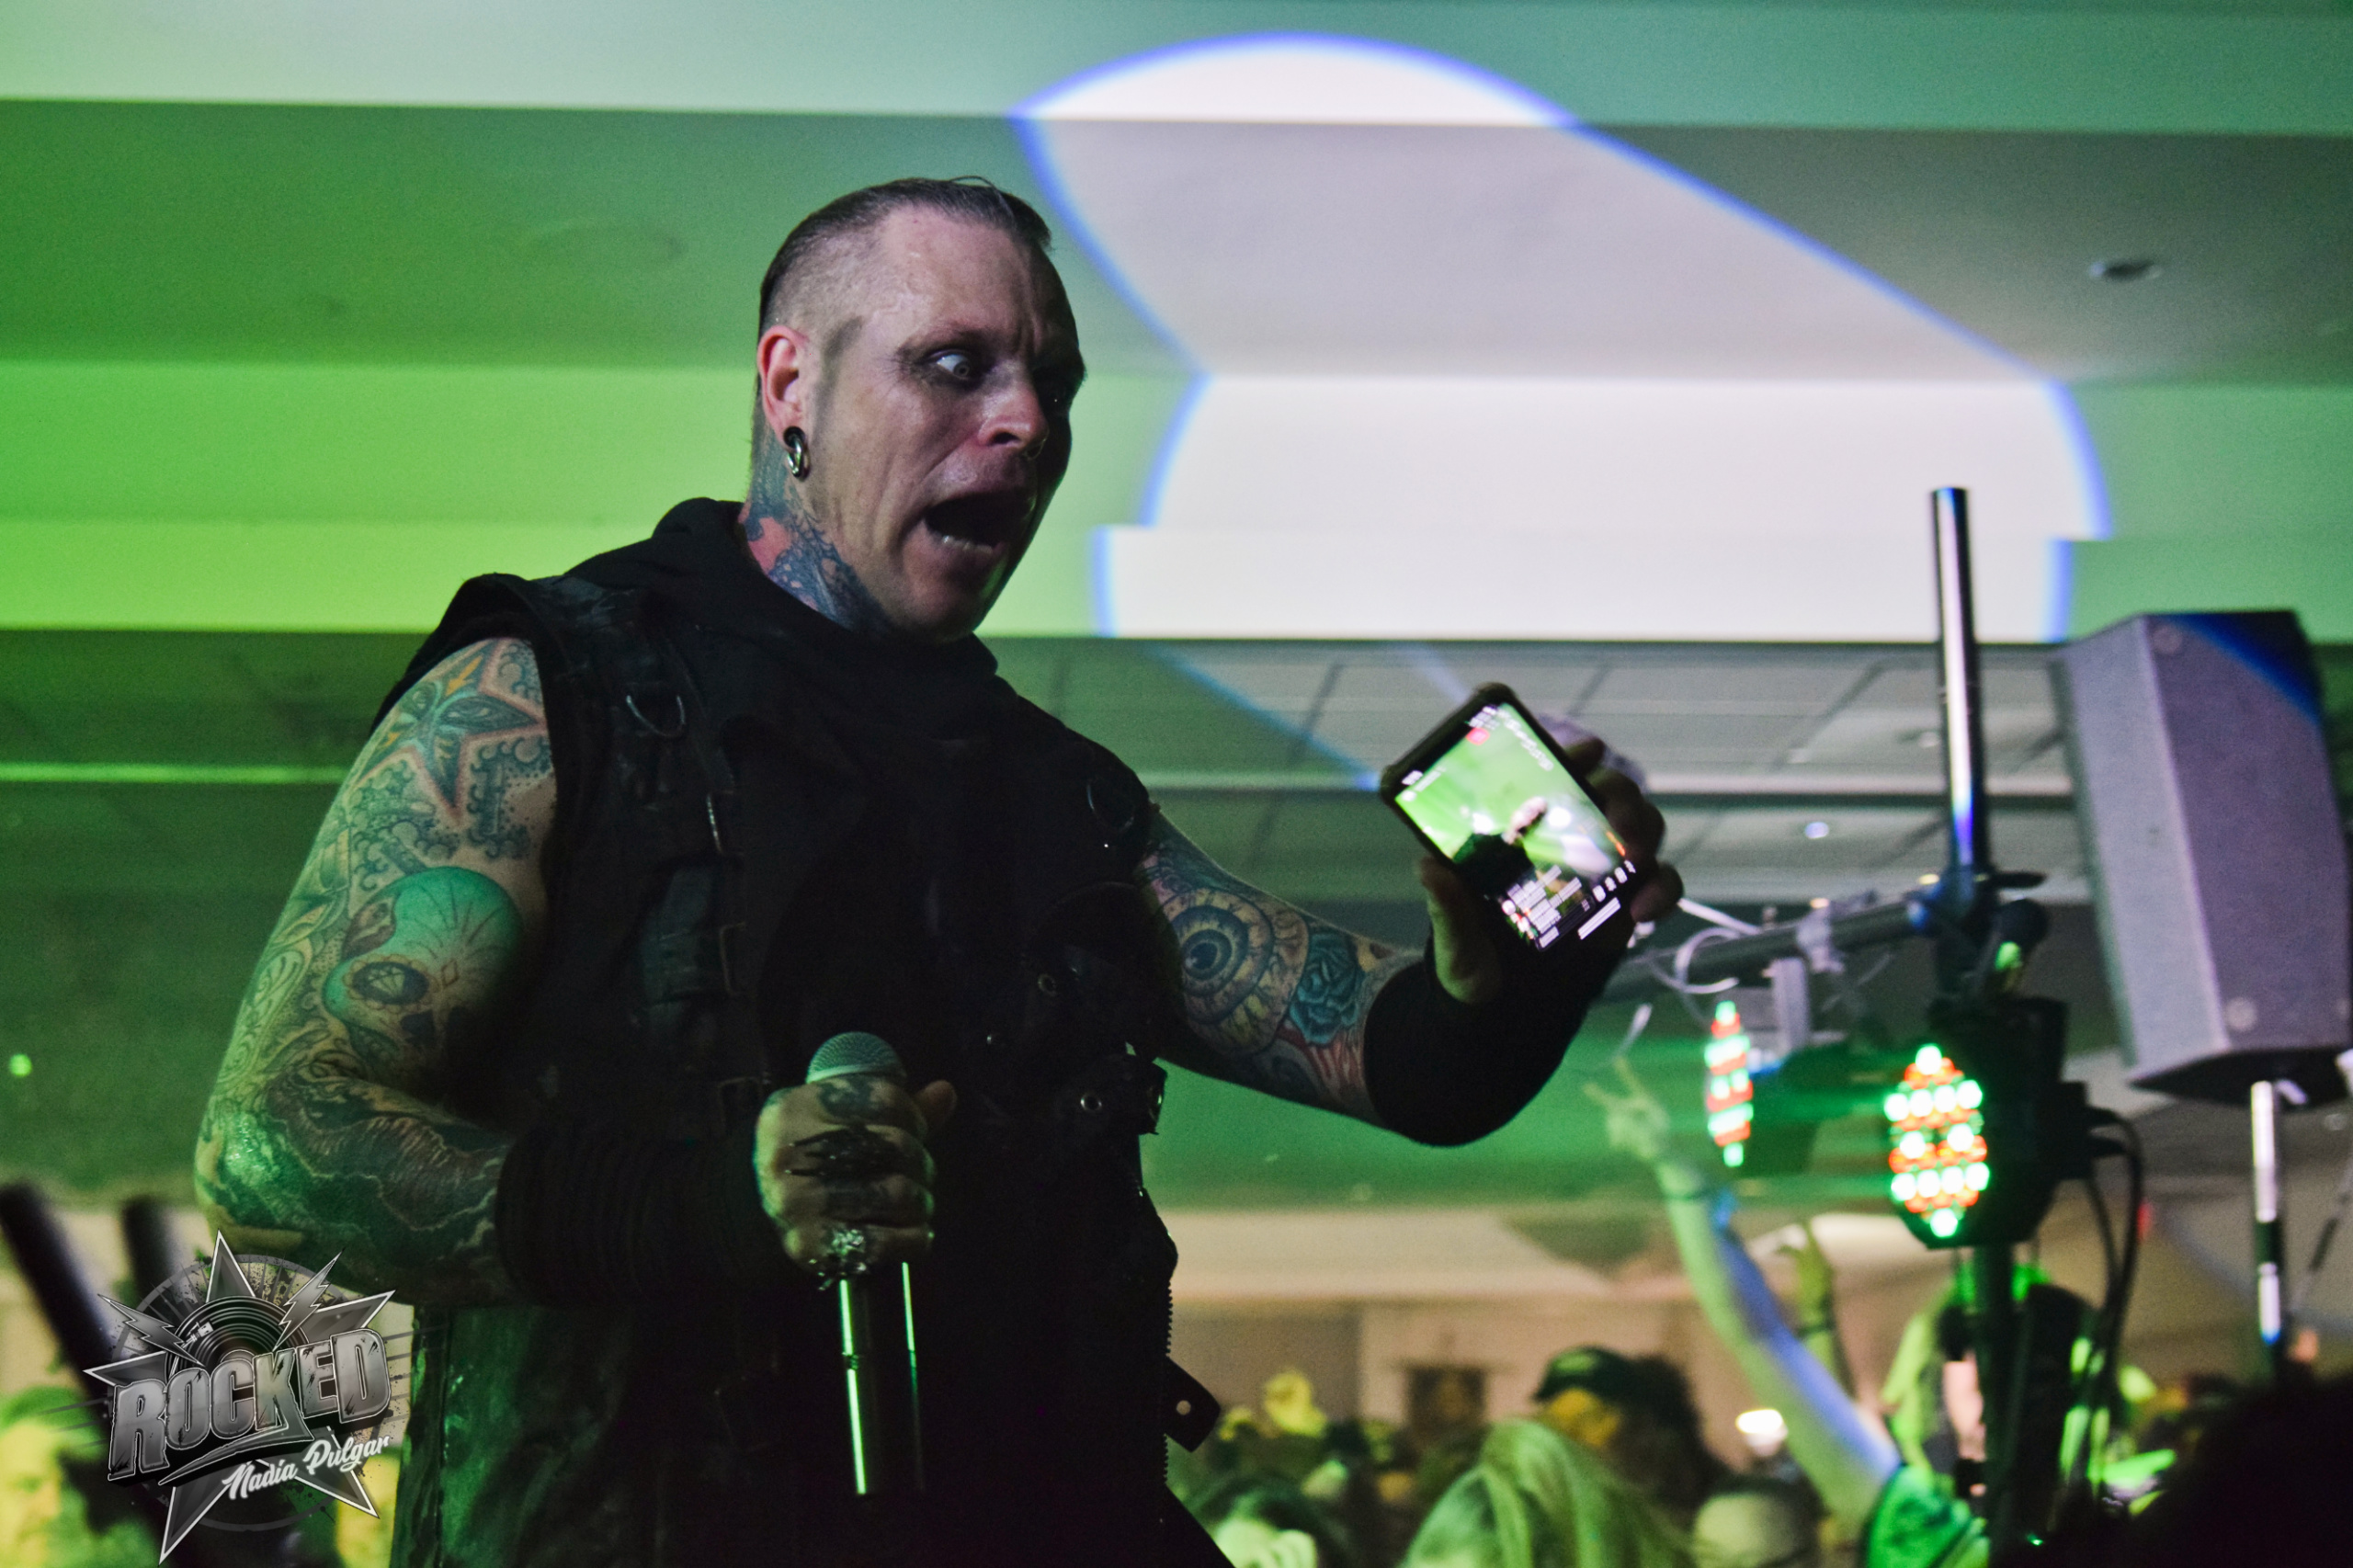 Combichrist Headlined Dark Force Fest at the Sheraton Castle in